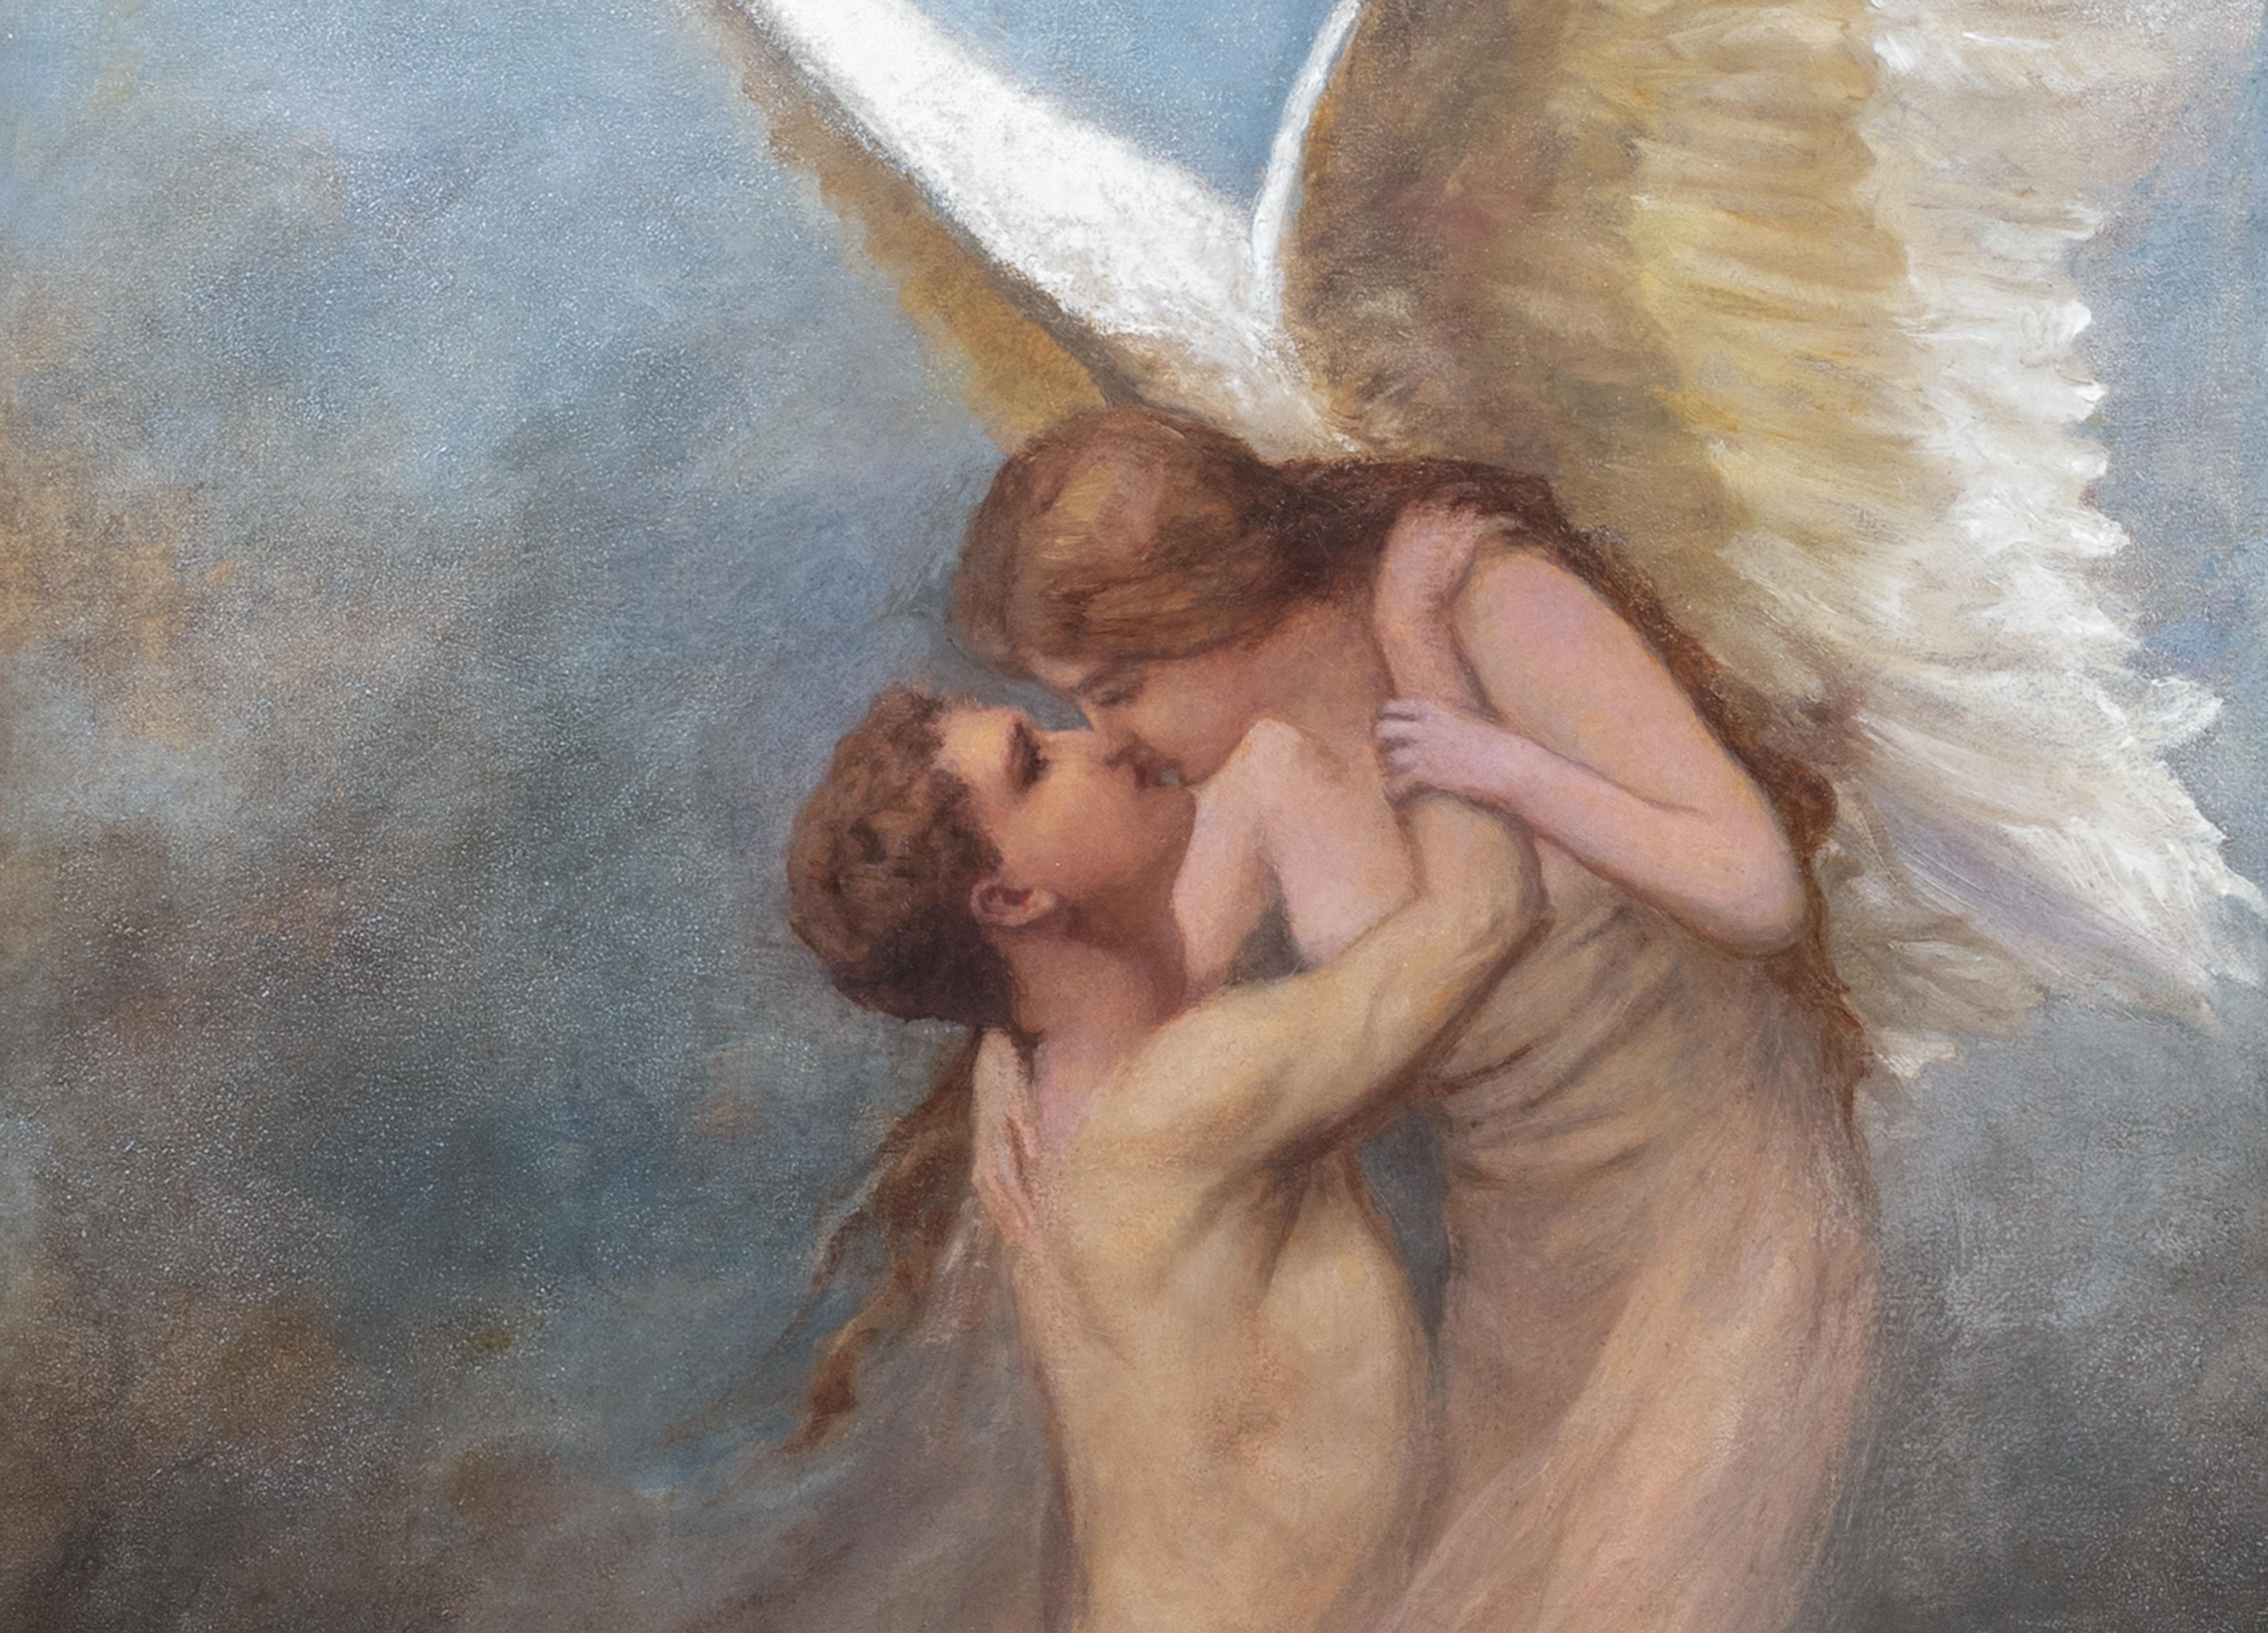 Salvation, circa 1900

signed E HARRISON

Large 19th Century Classical Pre-Raphaelite scene of angel ascending toward the heavens with a man in her embrace, oil on canvas signed Harrison. Excellent quality and condition Neo classical scene as a